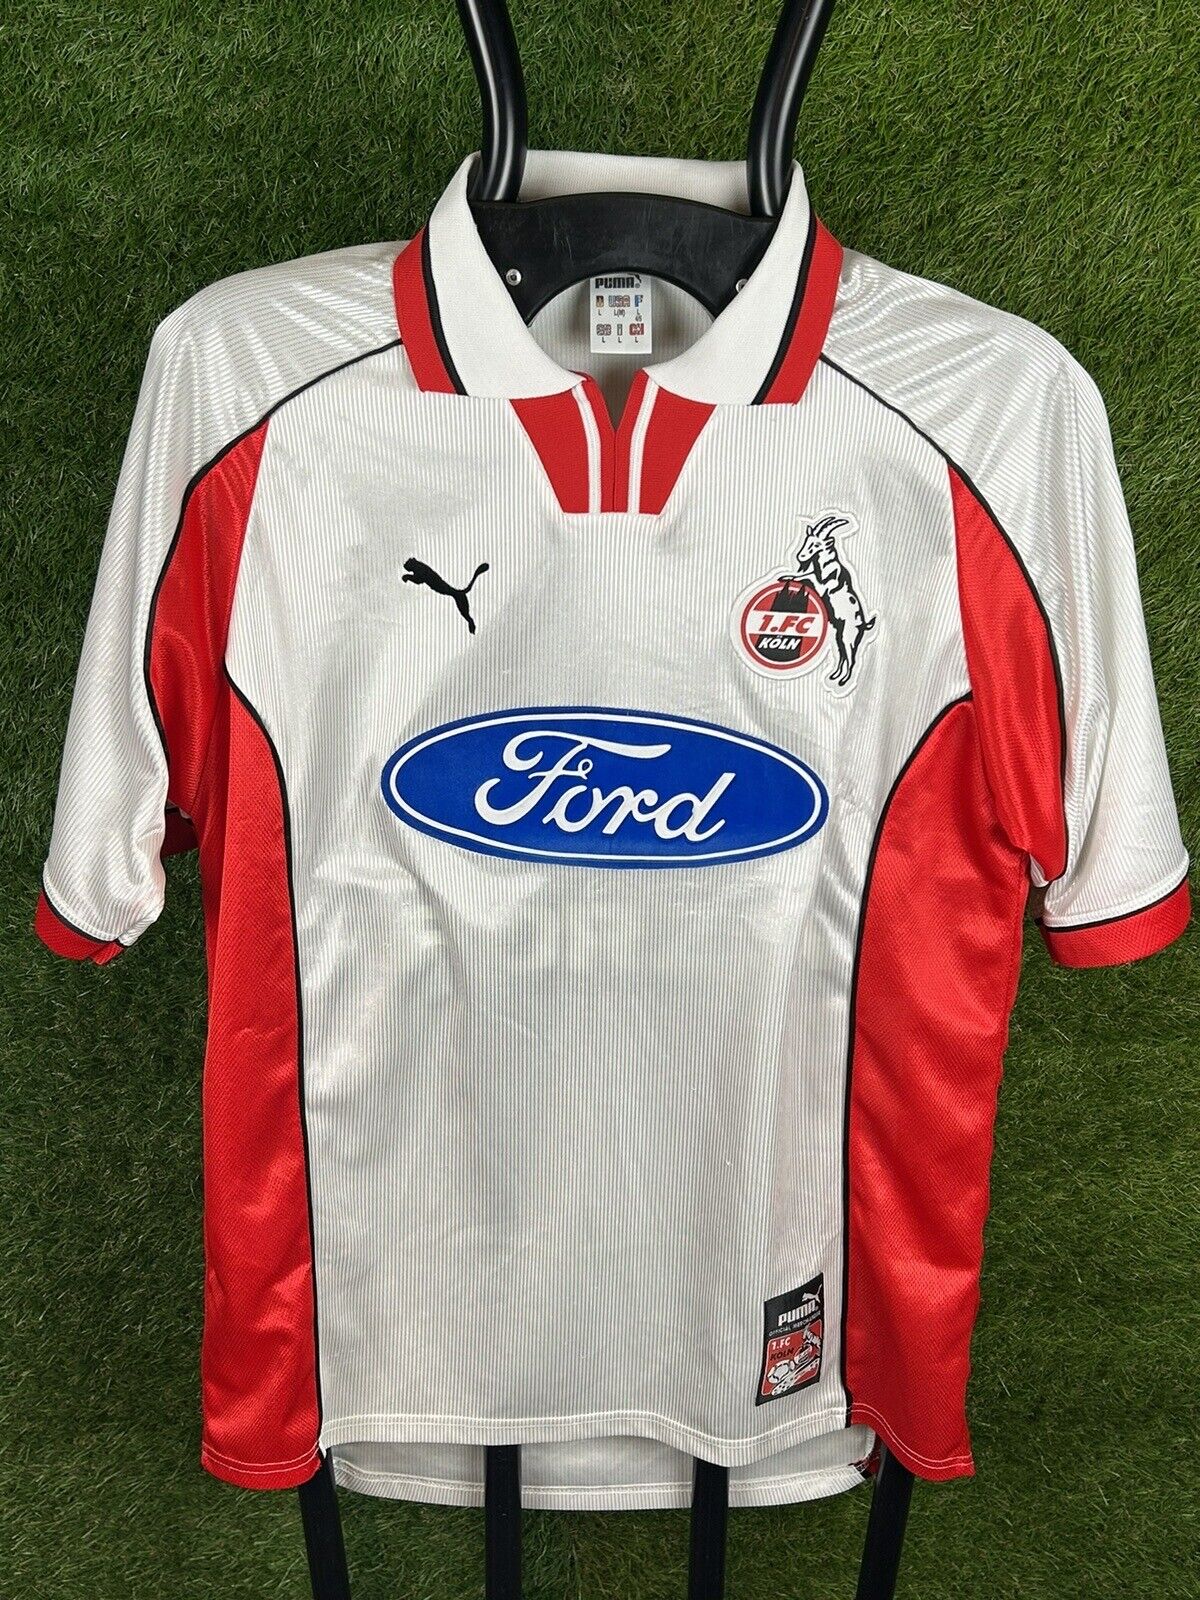 1. FC Koln 1998/99 Home Shirt #5 Petri Adult Size Large Very Good Condition